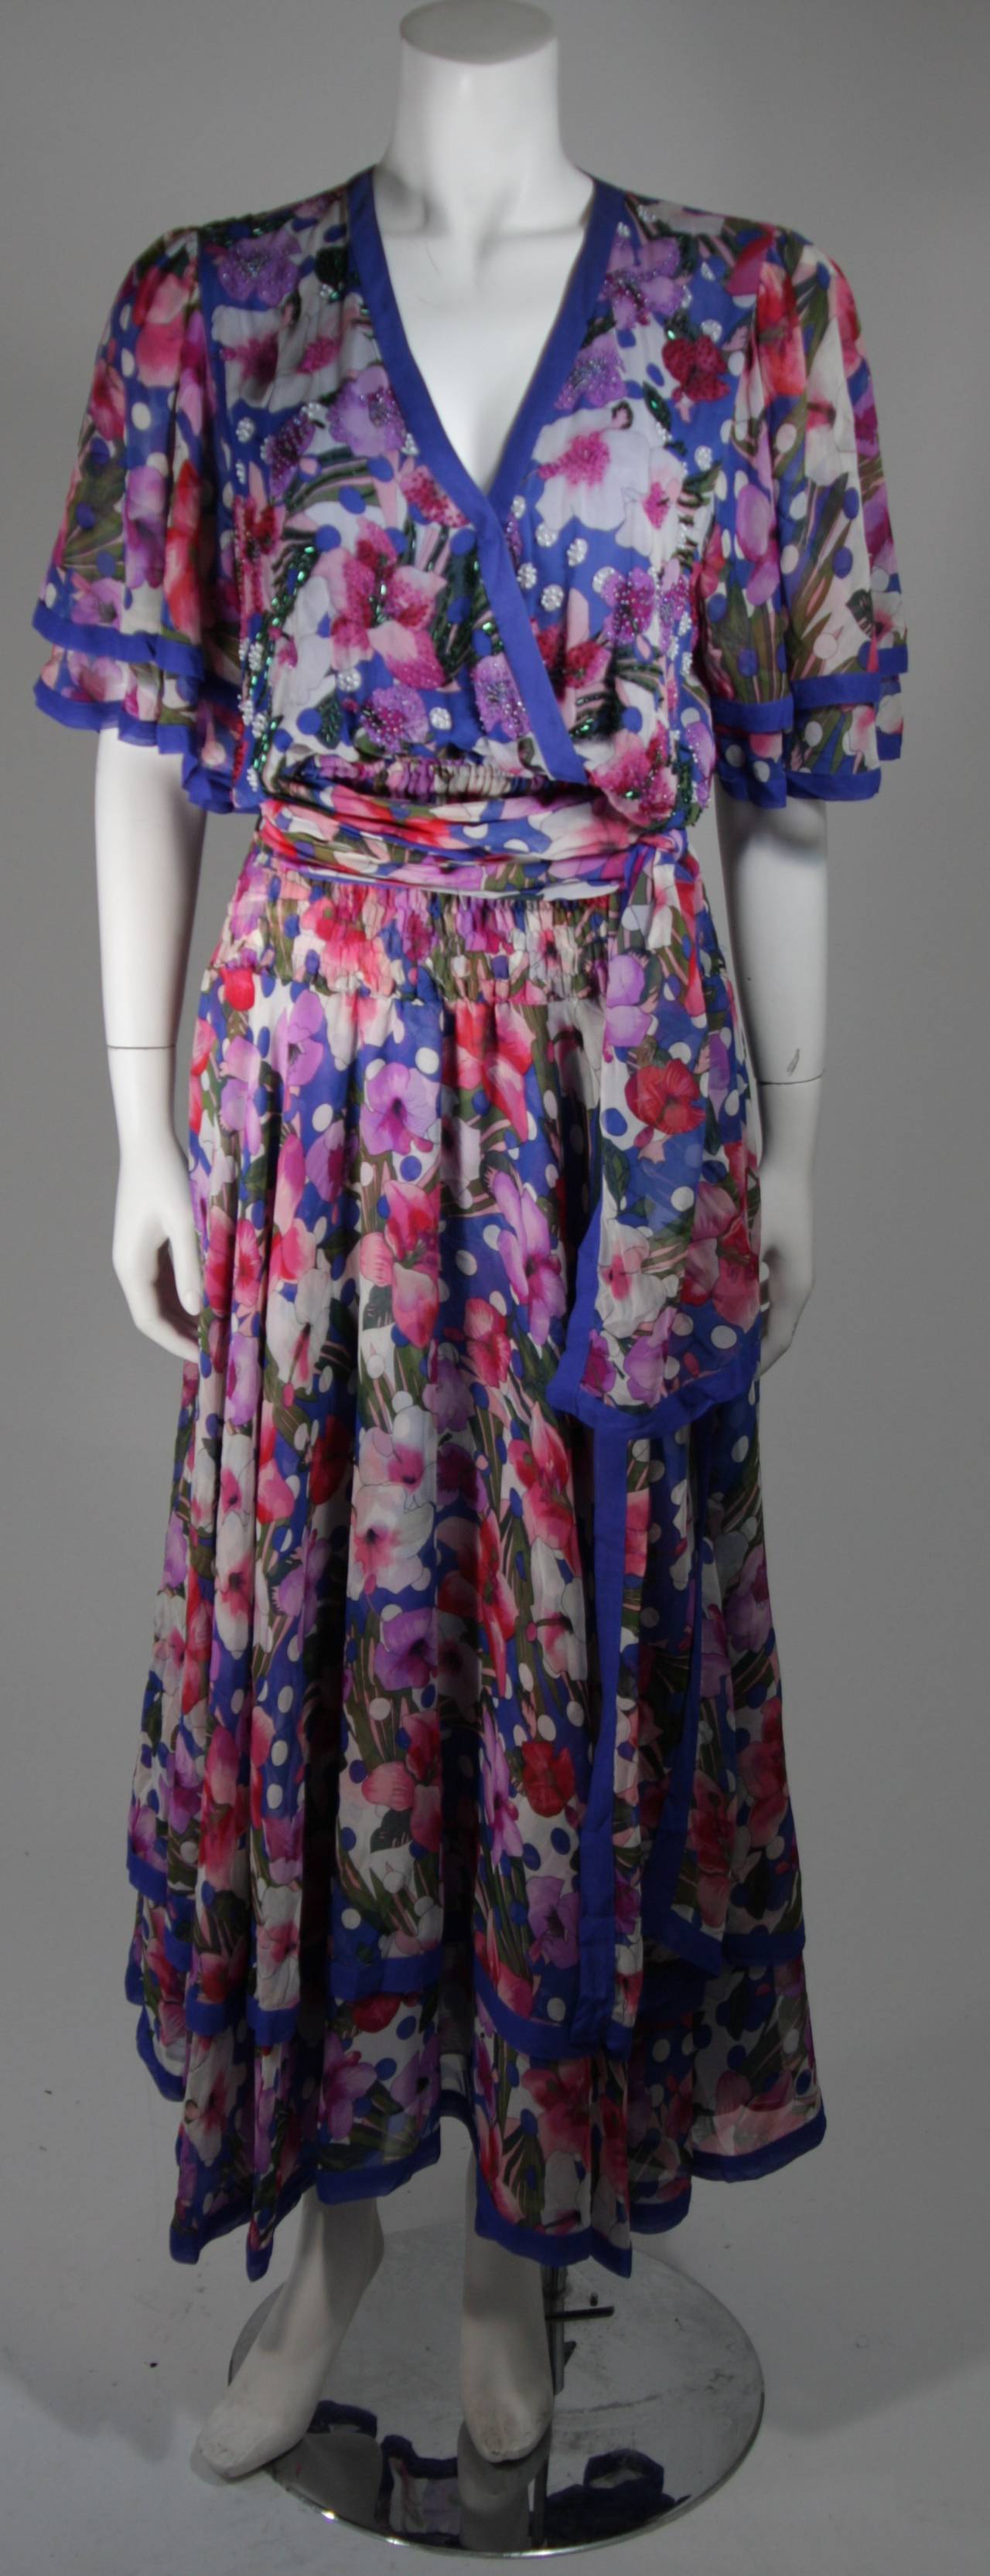 This Diane Freis design is available for viewing at our Beverly Hills Boutique. We offer a large selection of evening gowns and luxury garments.

This maxi dress is composed of a floral print silk chiffon. The dress has a v-plunge neckline which